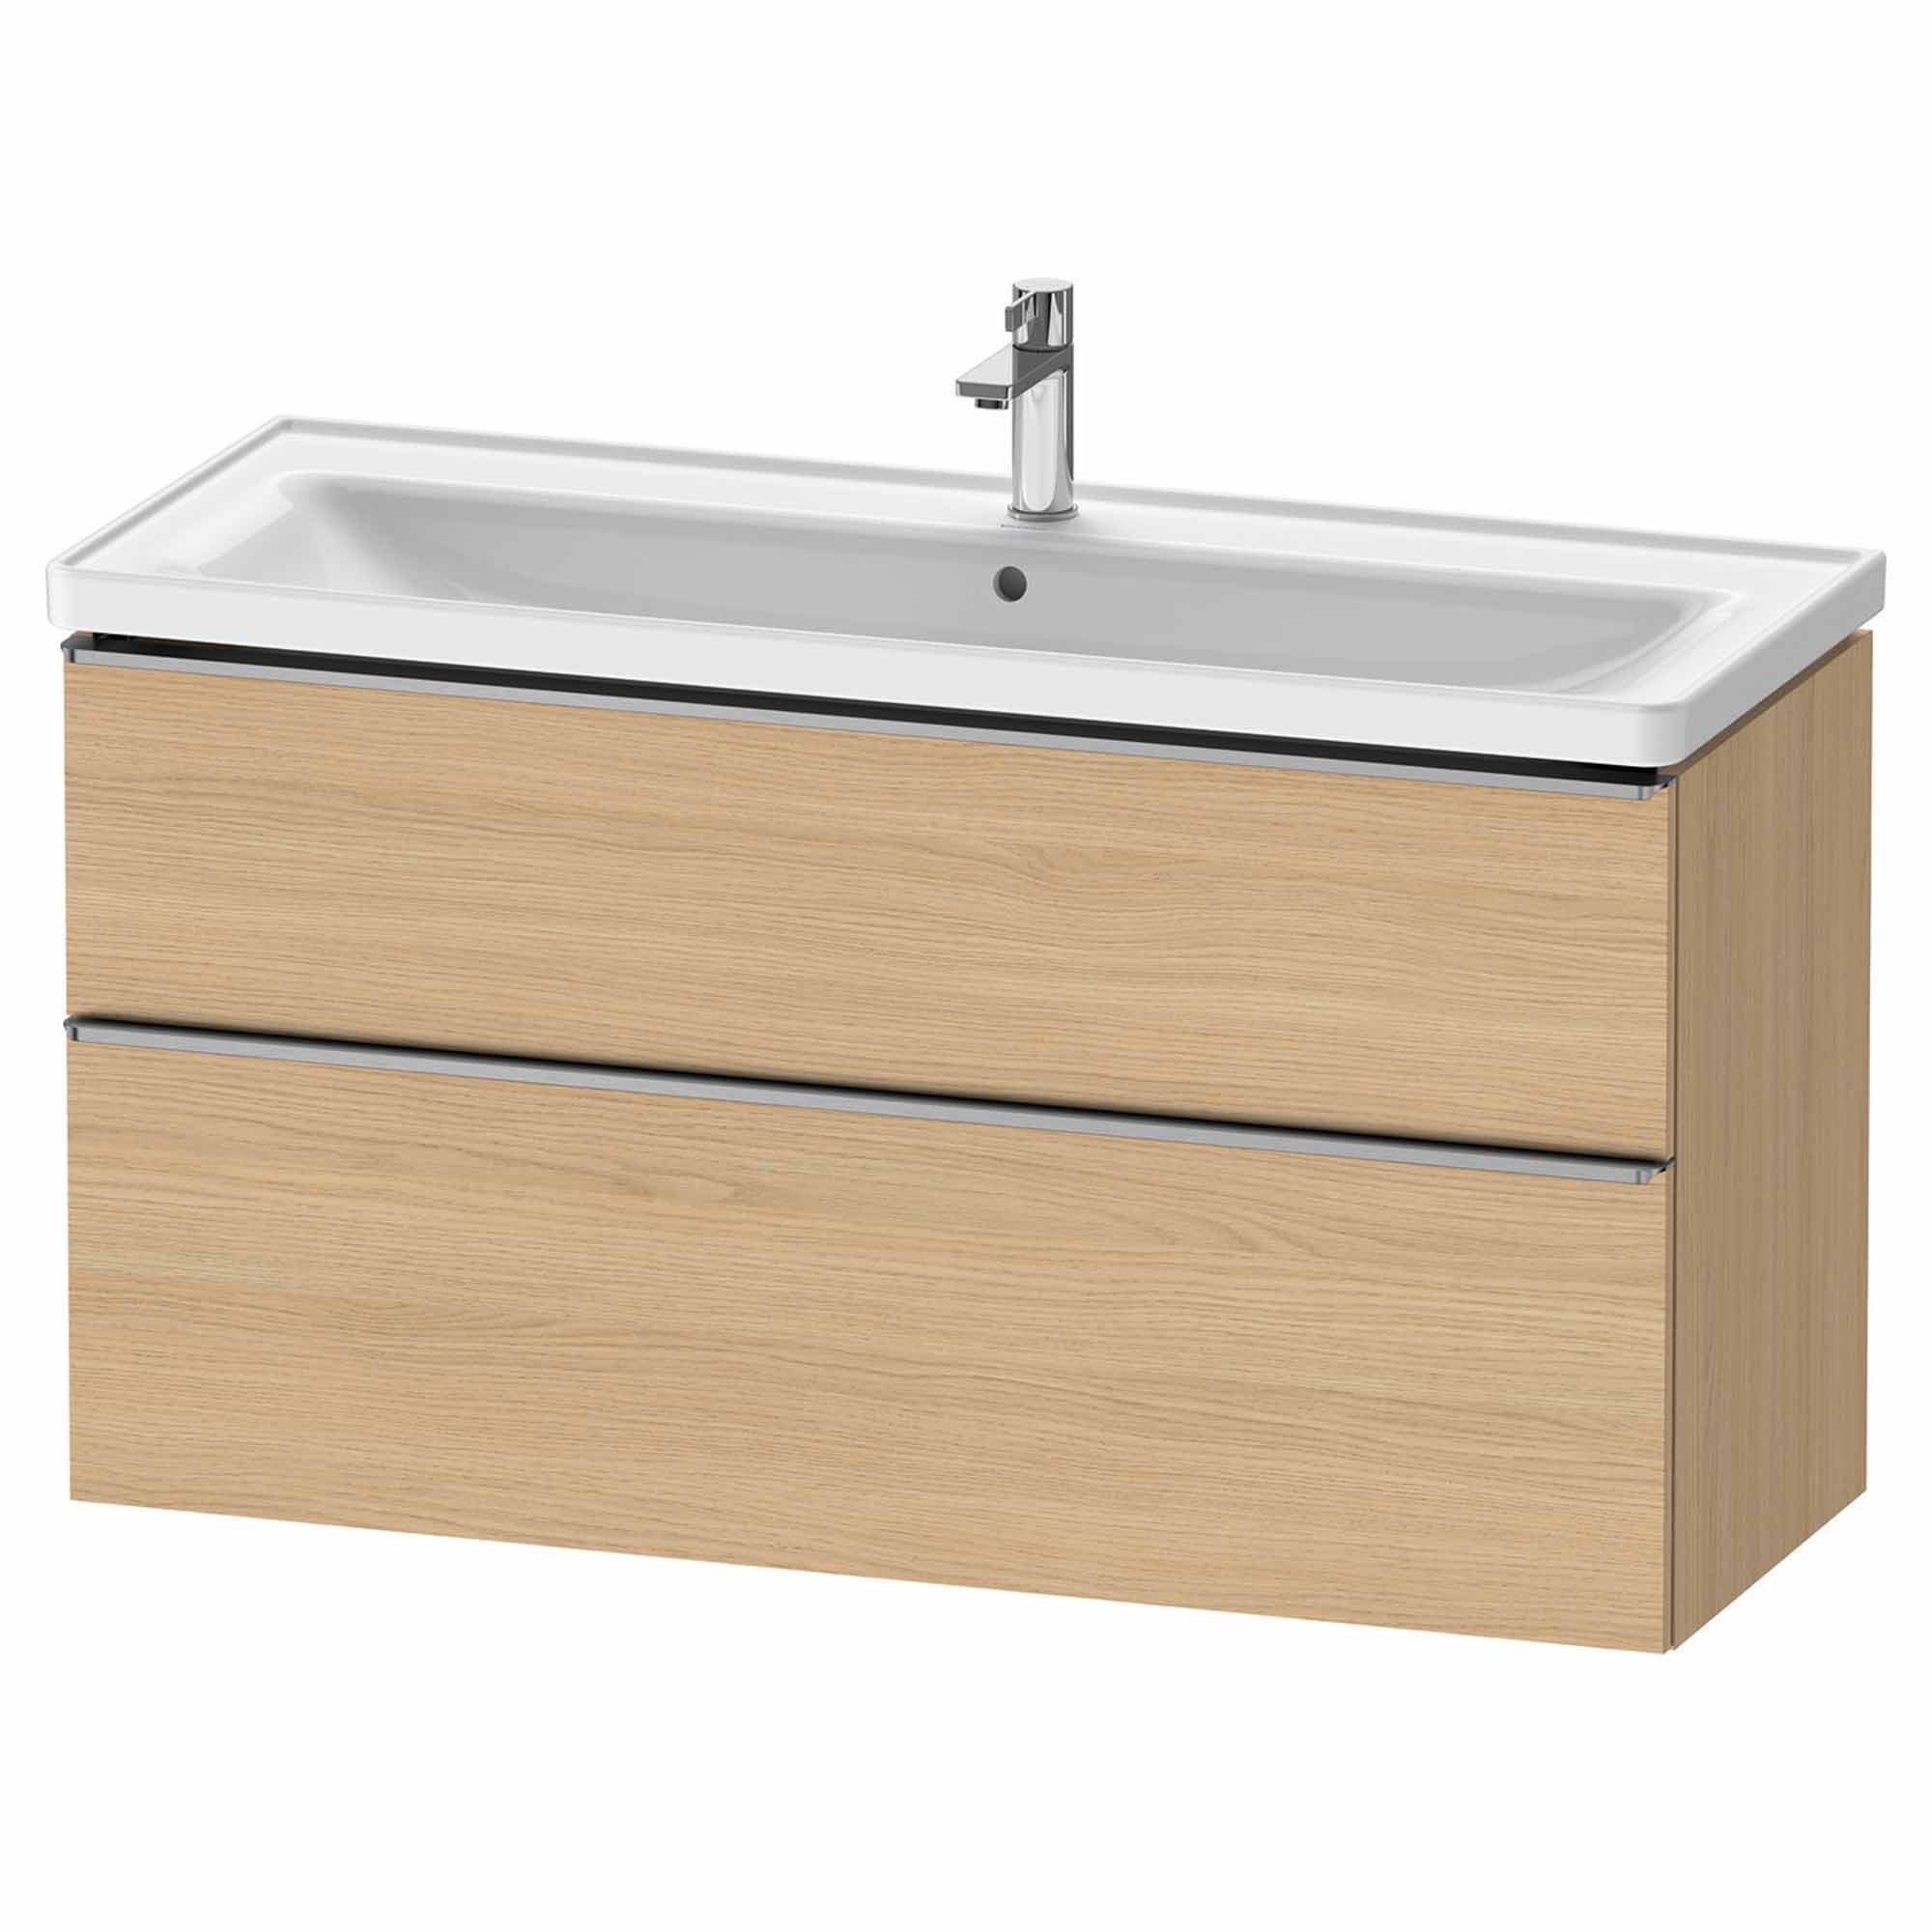 duravit d-neo 1200mm wall mounted vanity unit with d-neo basin natural oak stainless steel handles